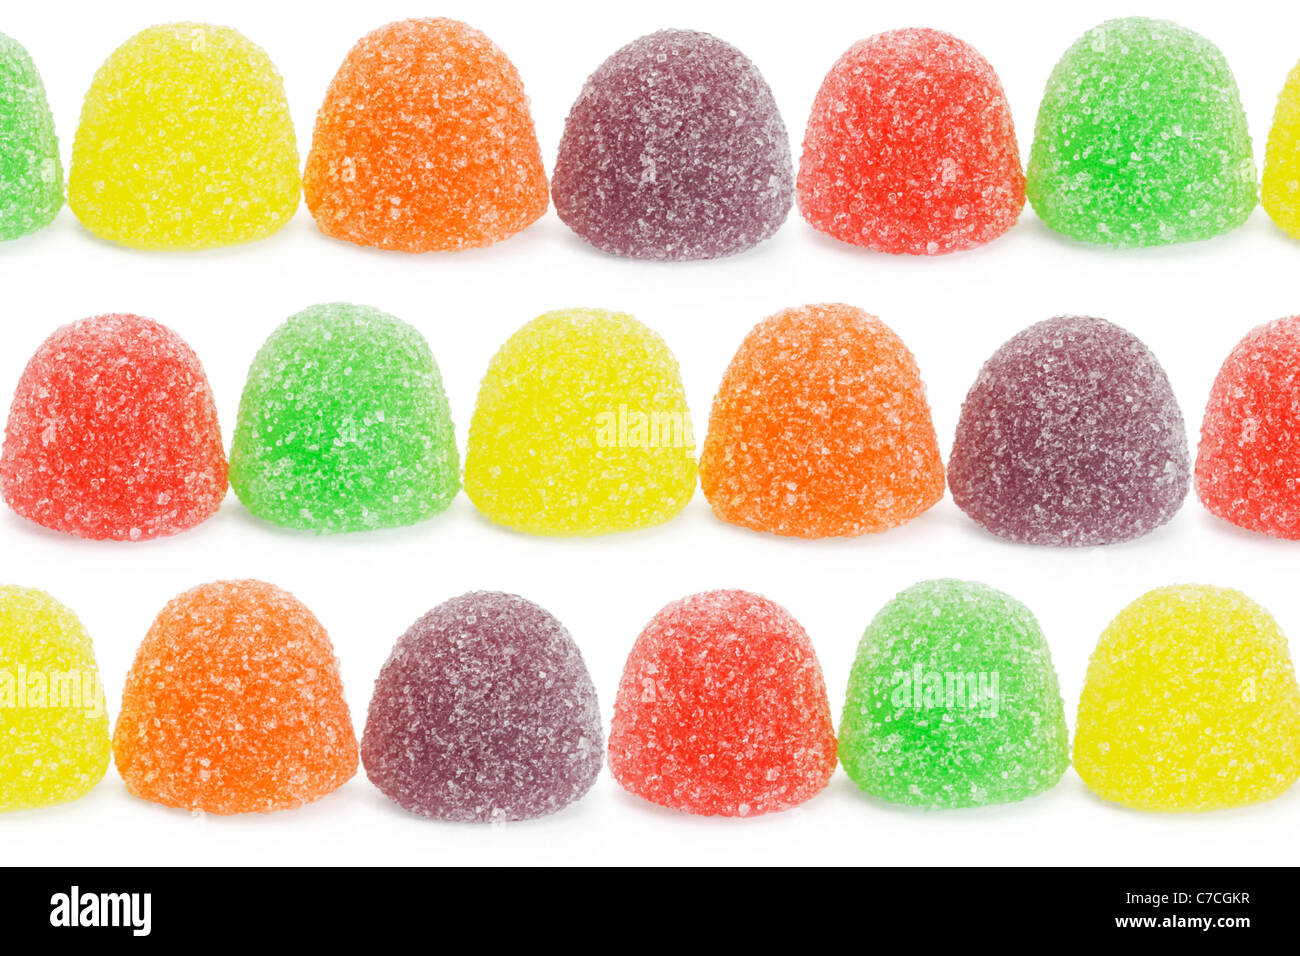 Multicolor soft jelly candies arranged on white background Stock Photo